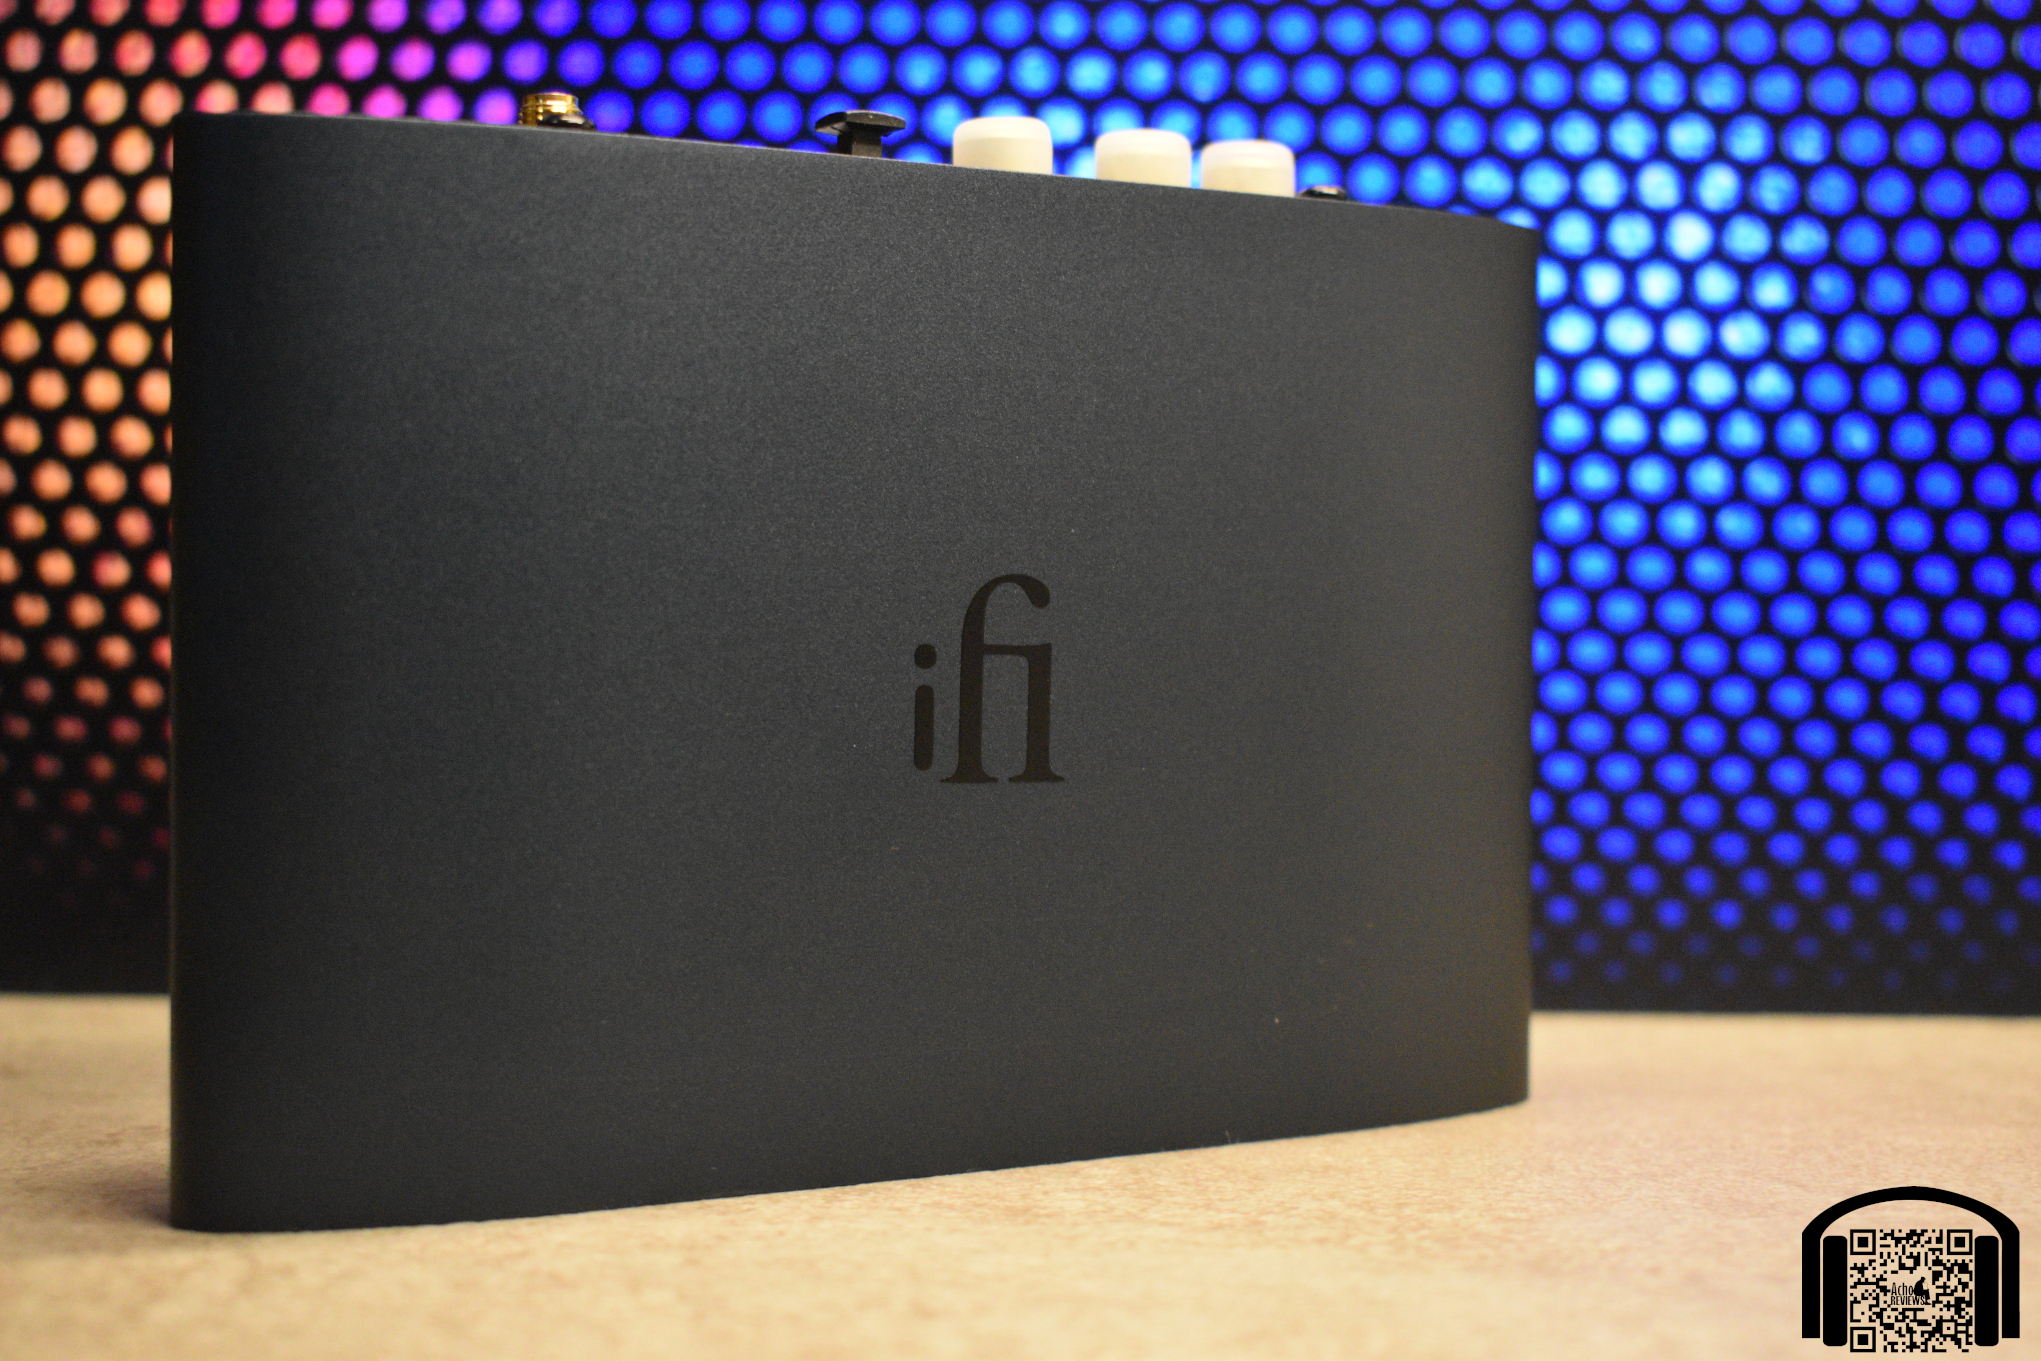 iFi Zen DAC V2 Review (including impressions on Signature version)